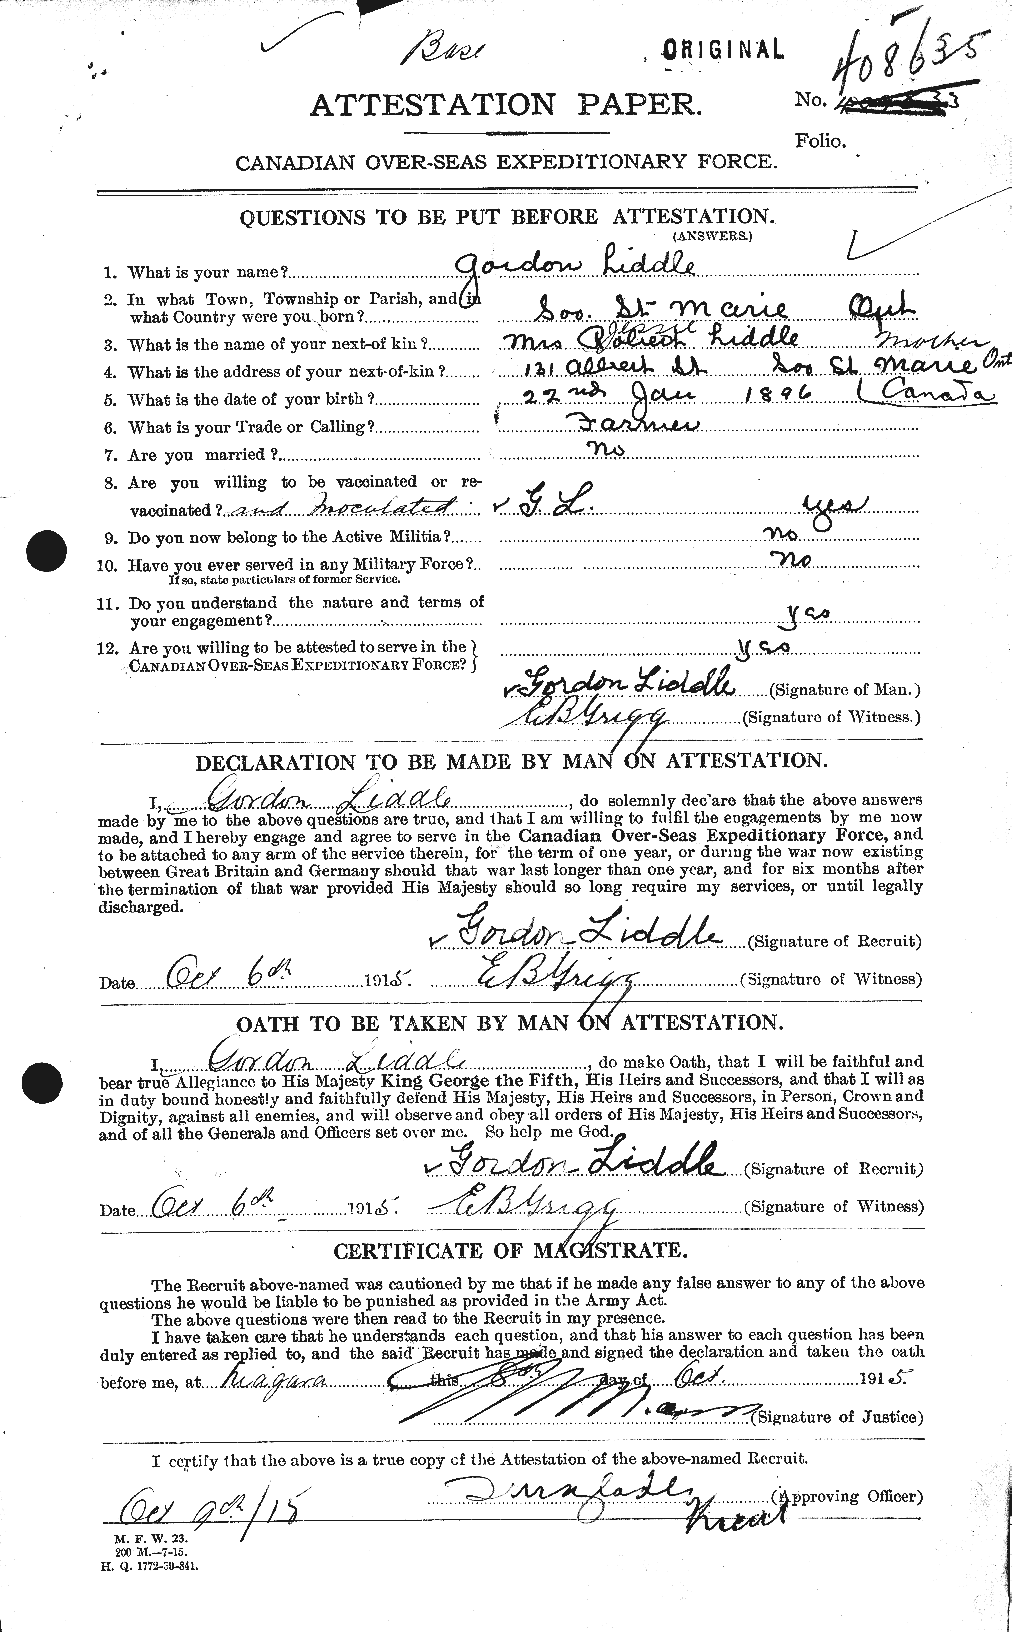 Personnel Records of the First World War - CEF 465316a